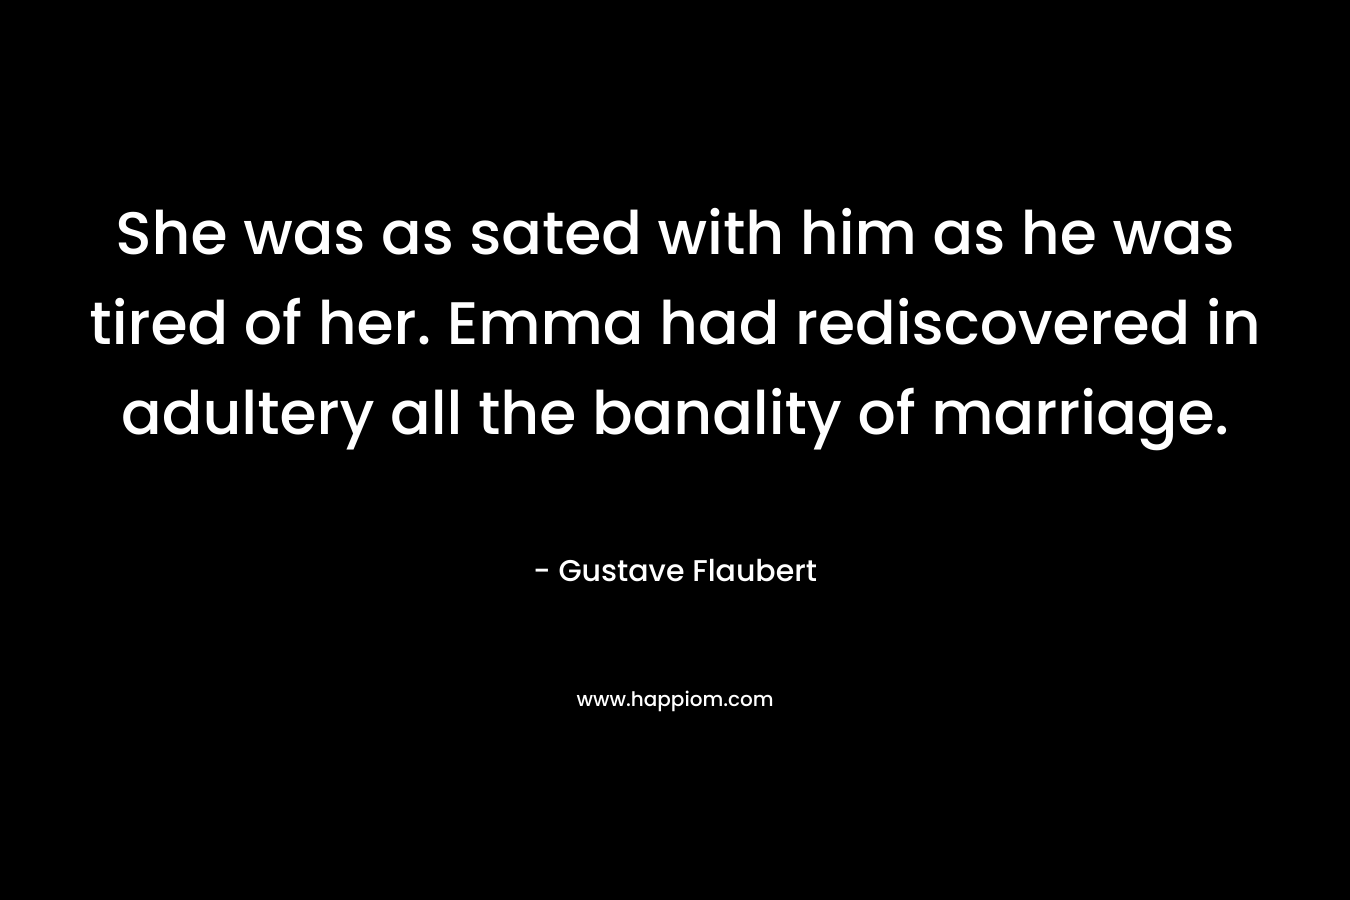 She was as sated with him as he was tired of her. Emma had rediscovered in adultery all the banality of marriage. – Gustave Flaubert